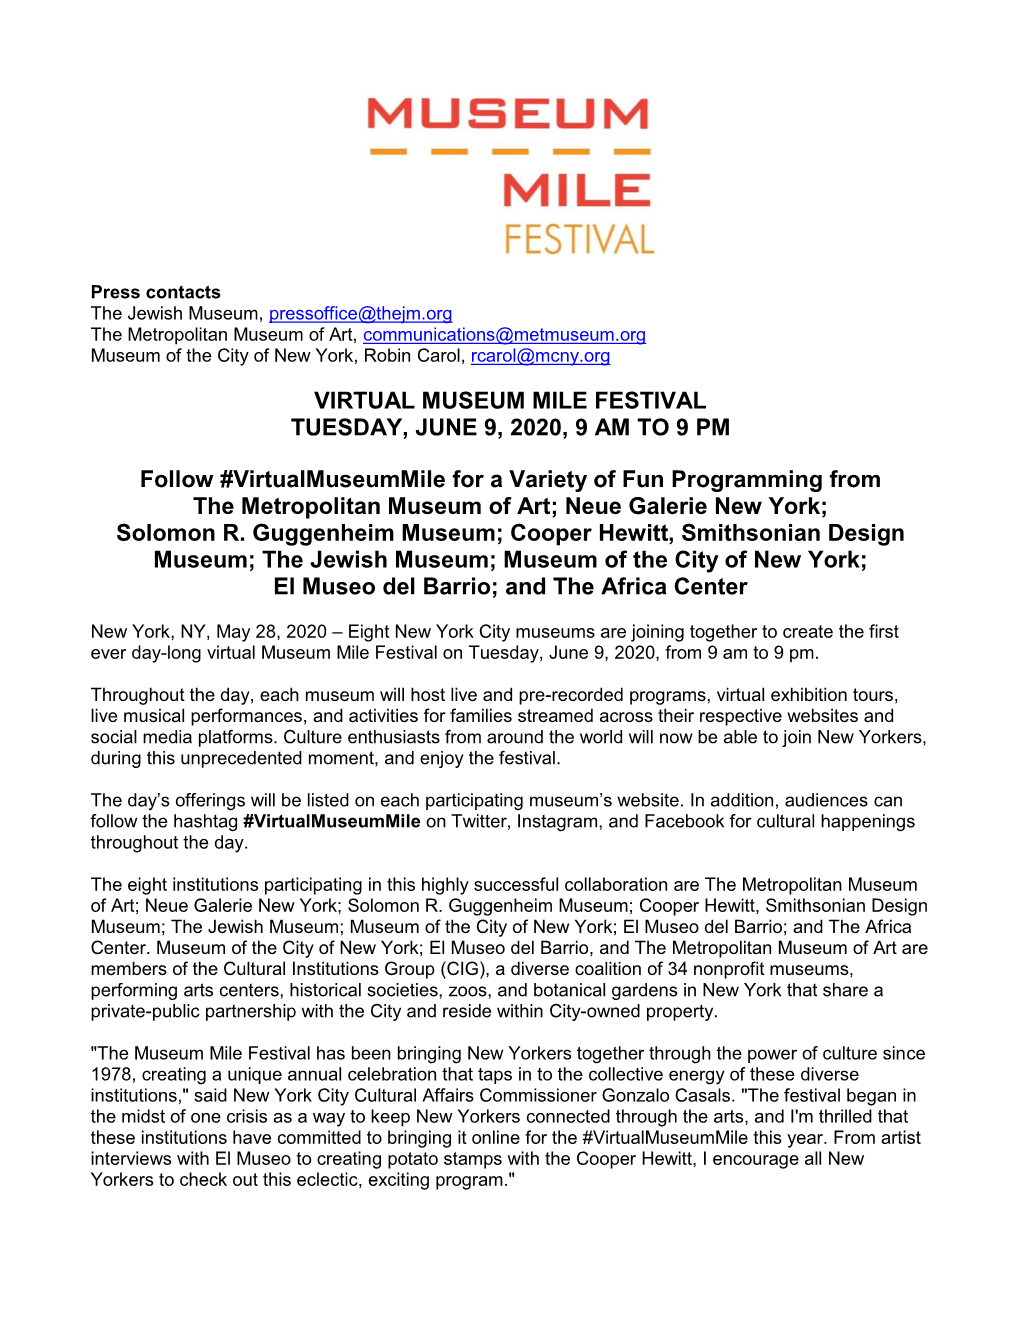 Virtual Museum Mile Festival Tuesday, June 9, 2020, 9 Am to 9 Pm